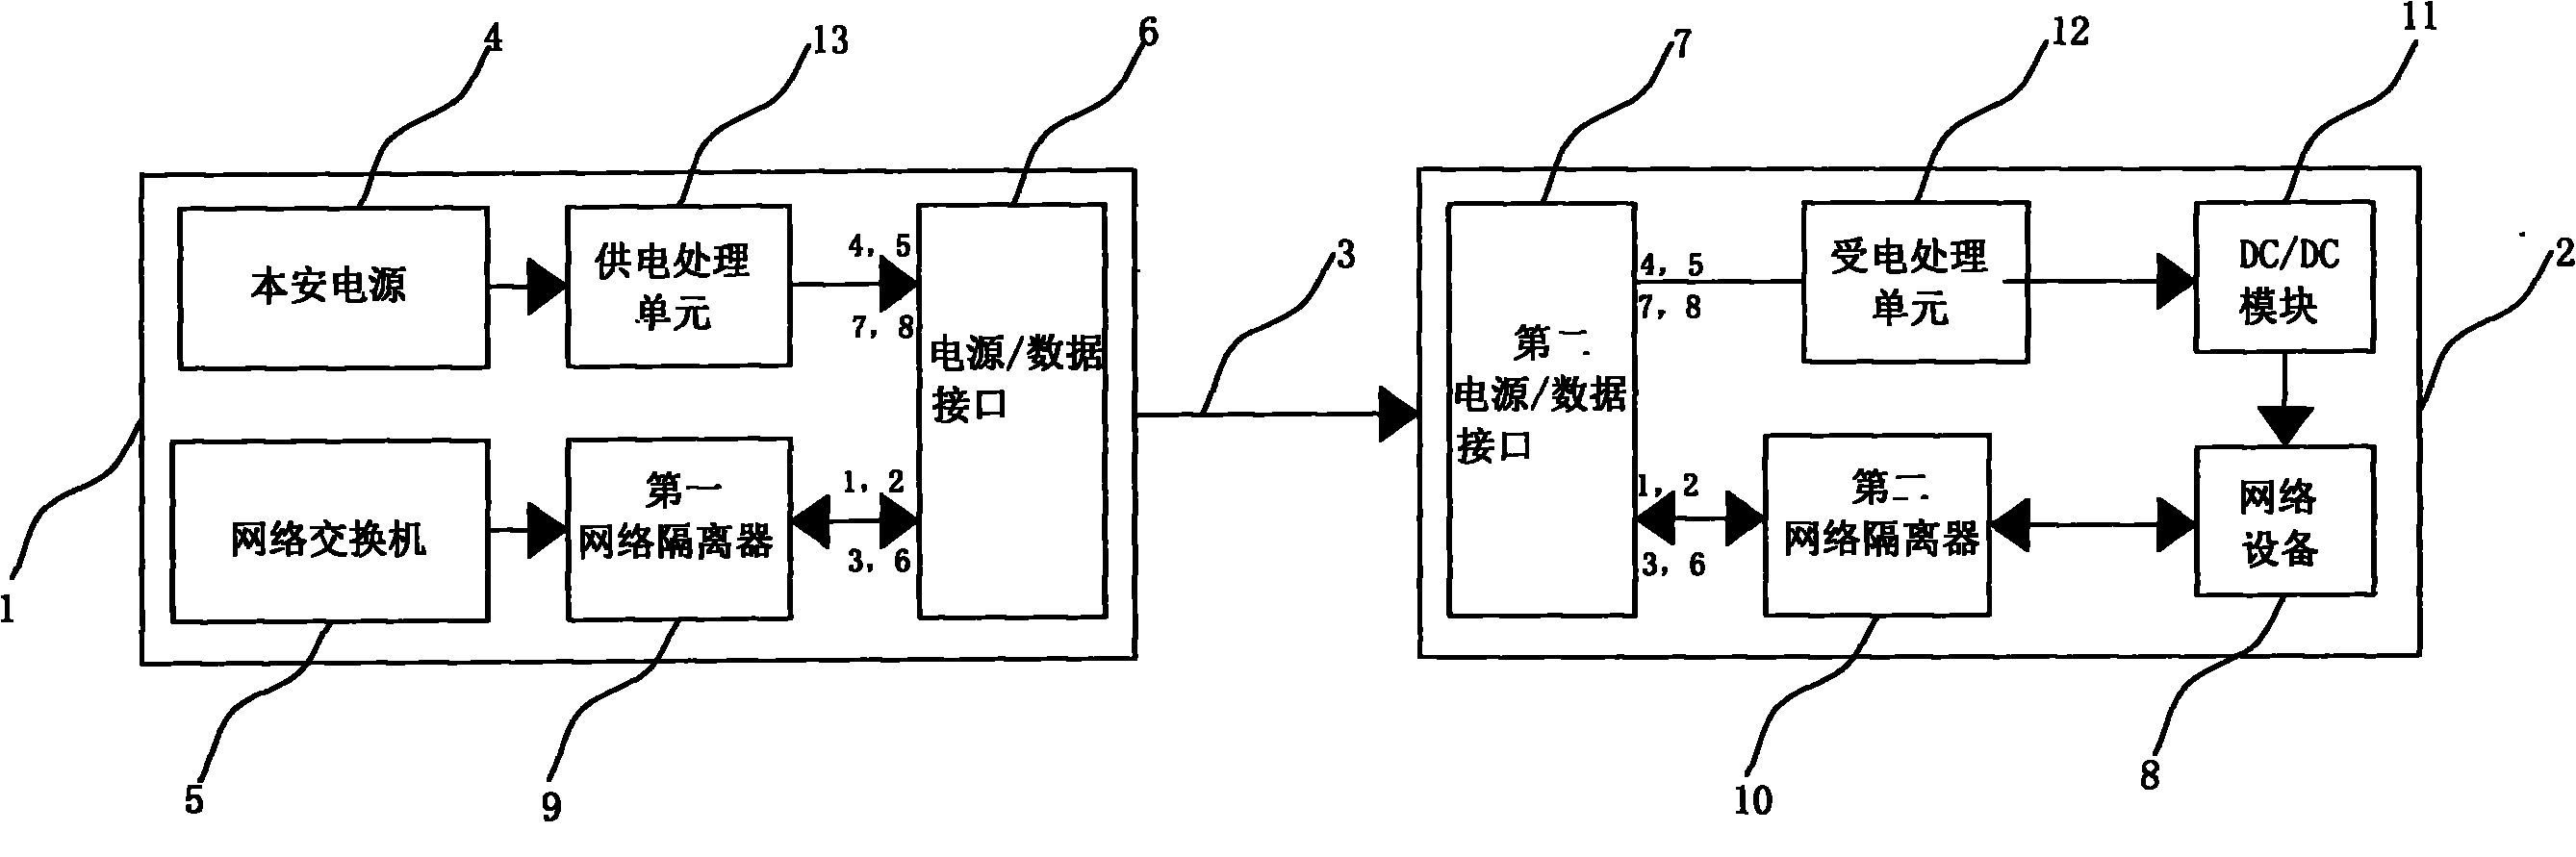 Power supply device for underground Ethernet